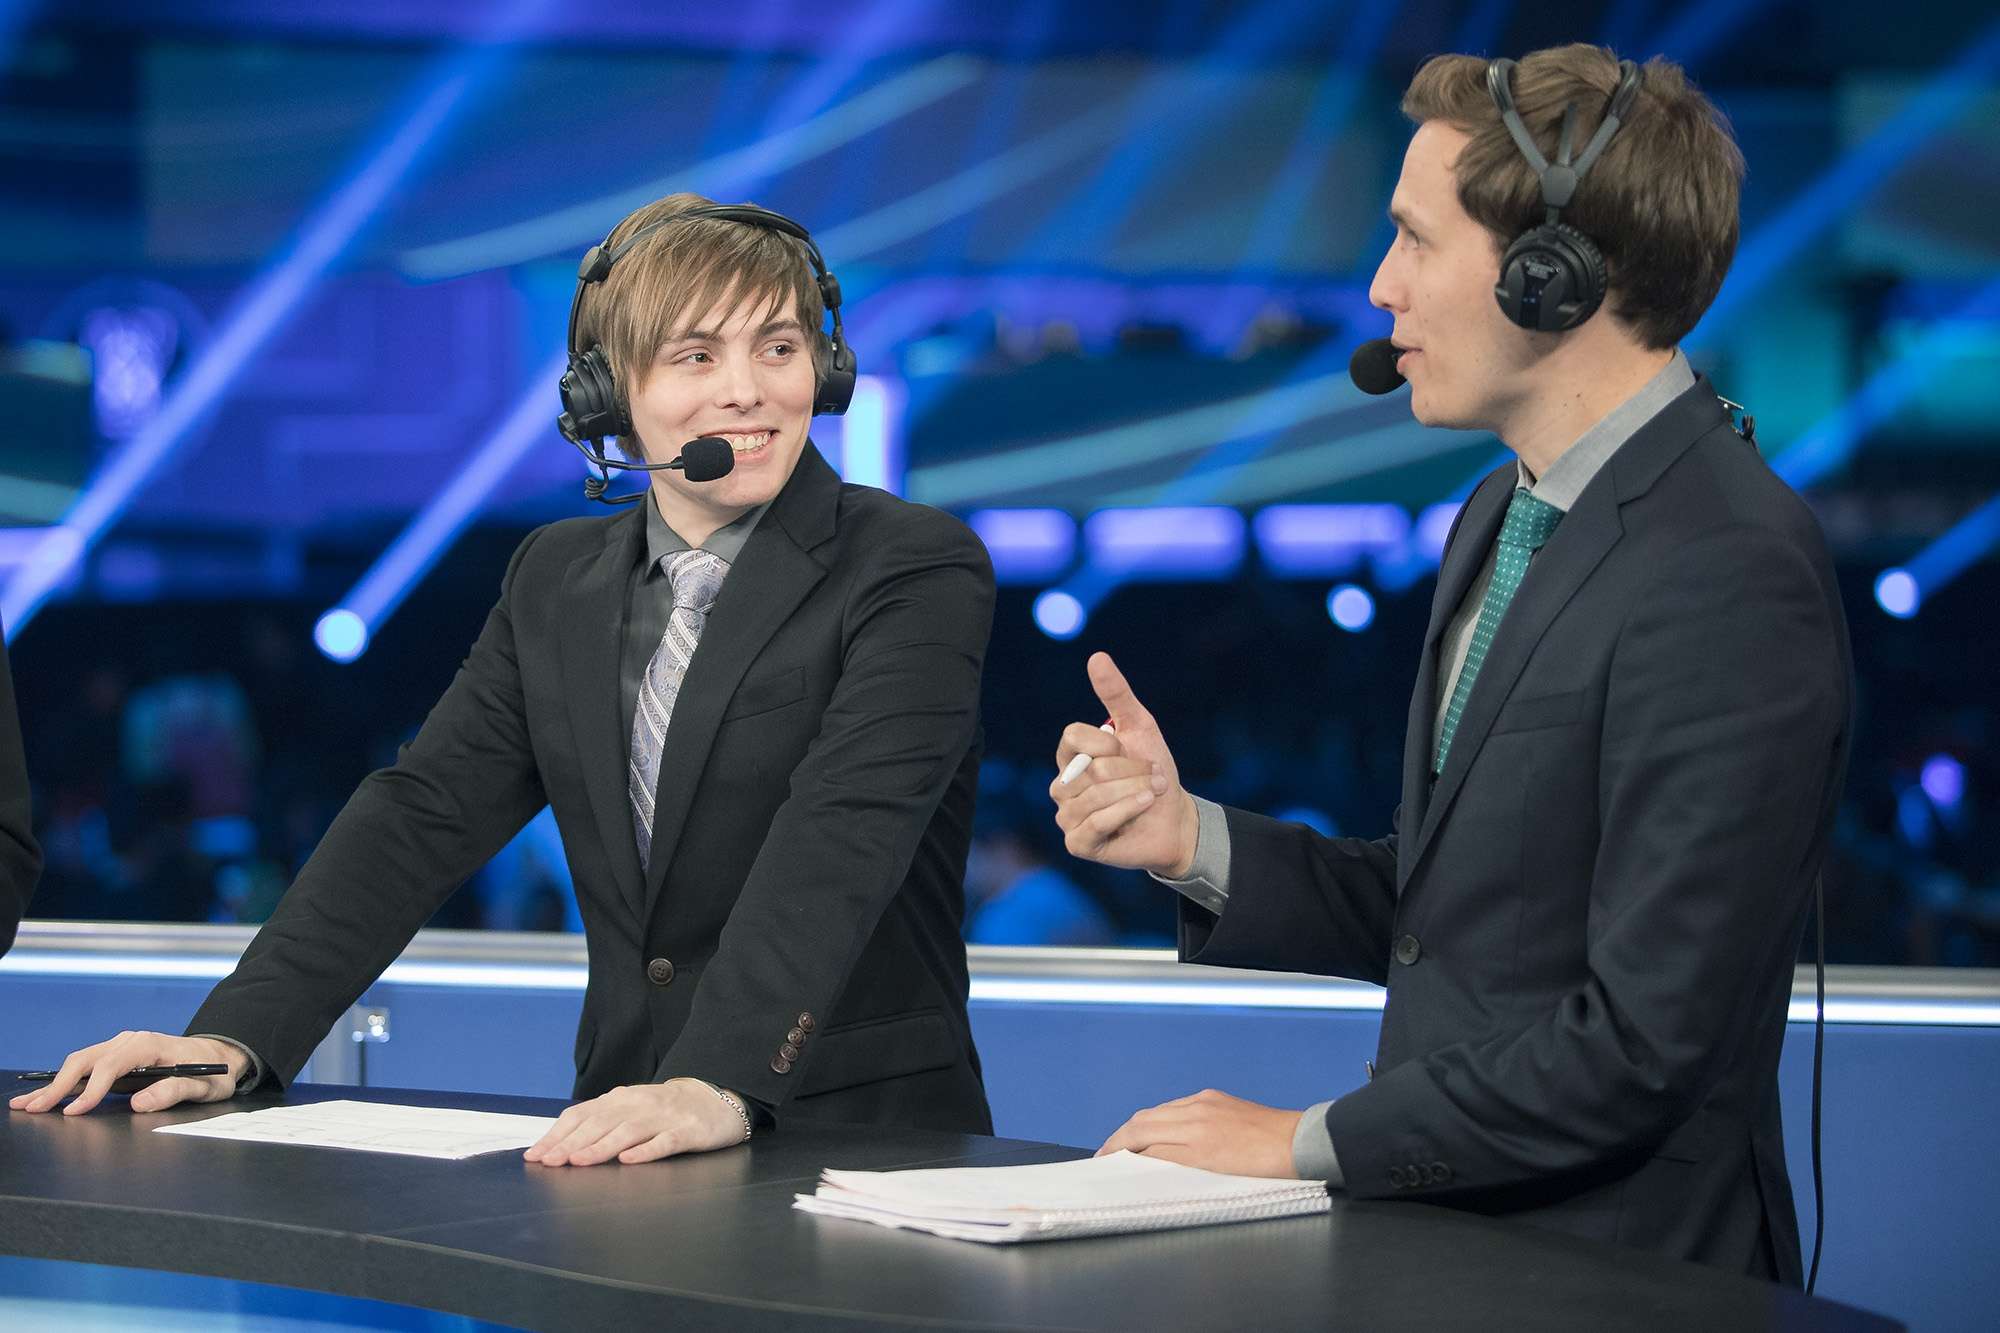 How Much Do League of Legends Casters Make?